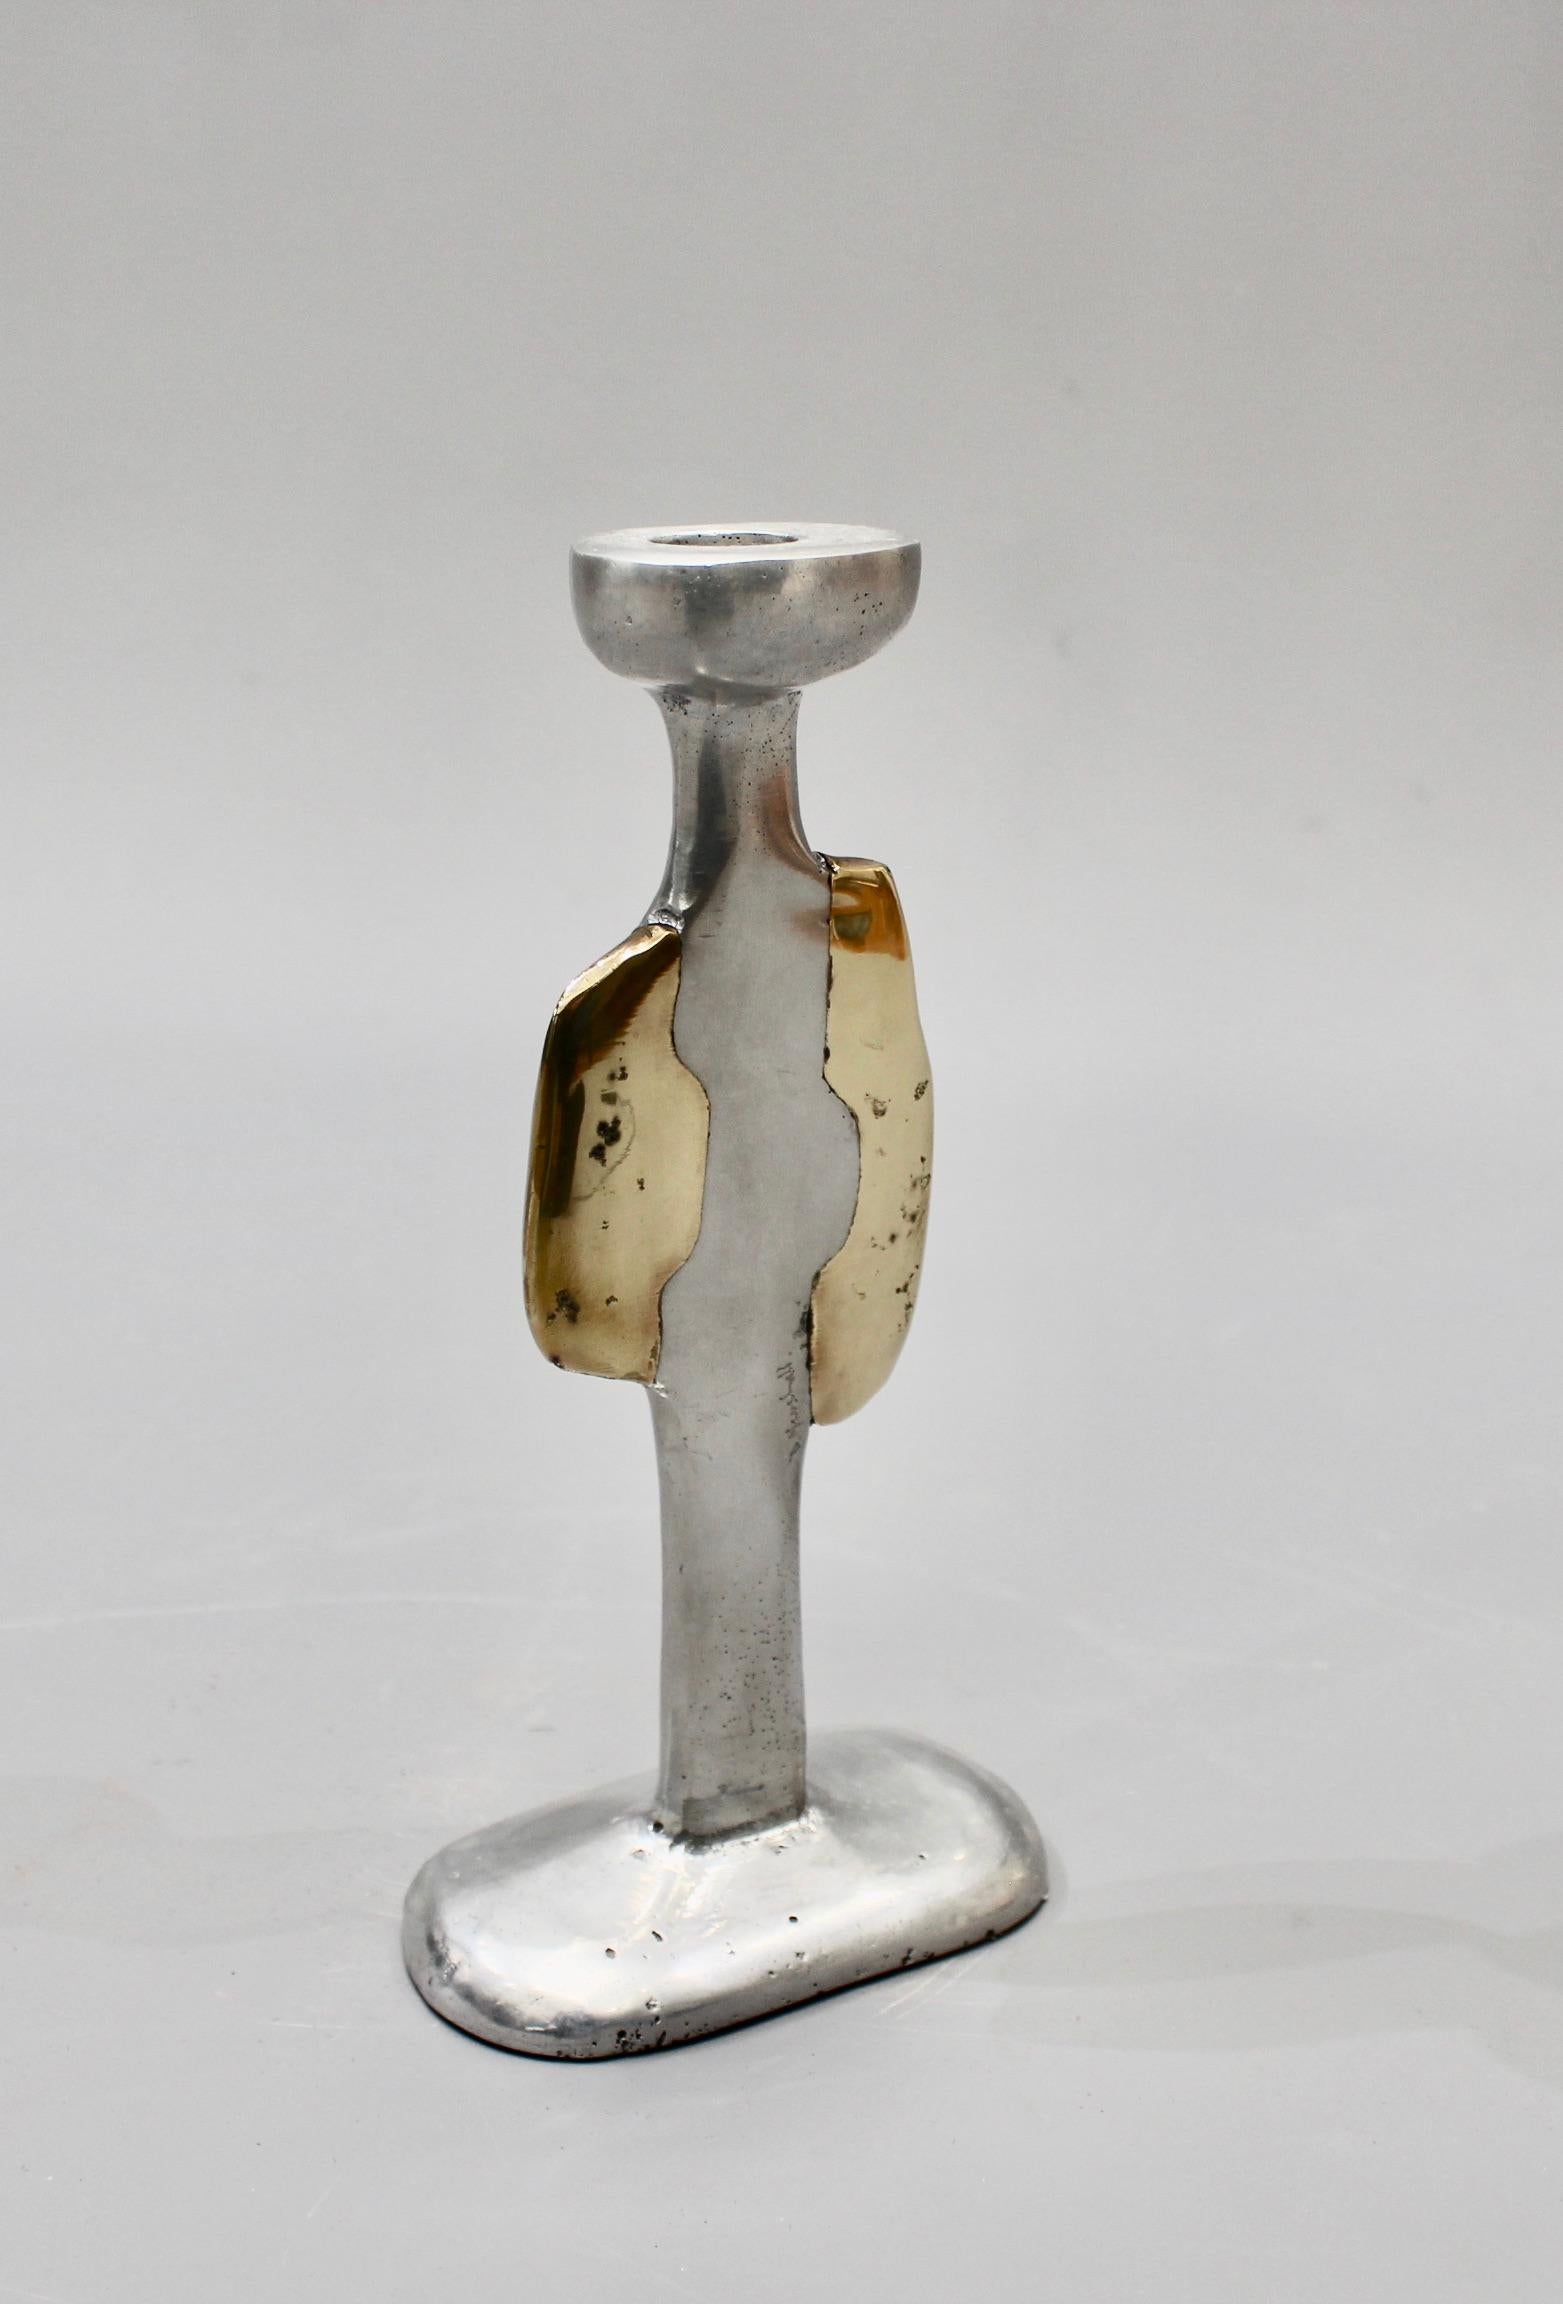 A single aluminium and brass candlestick by David Marshall (circa 1970s). Very unique piece which is all at once weighty and tactile, curvy and sensuous. The maker's signature is impressed on the aluminium surface near the brass side. The underside